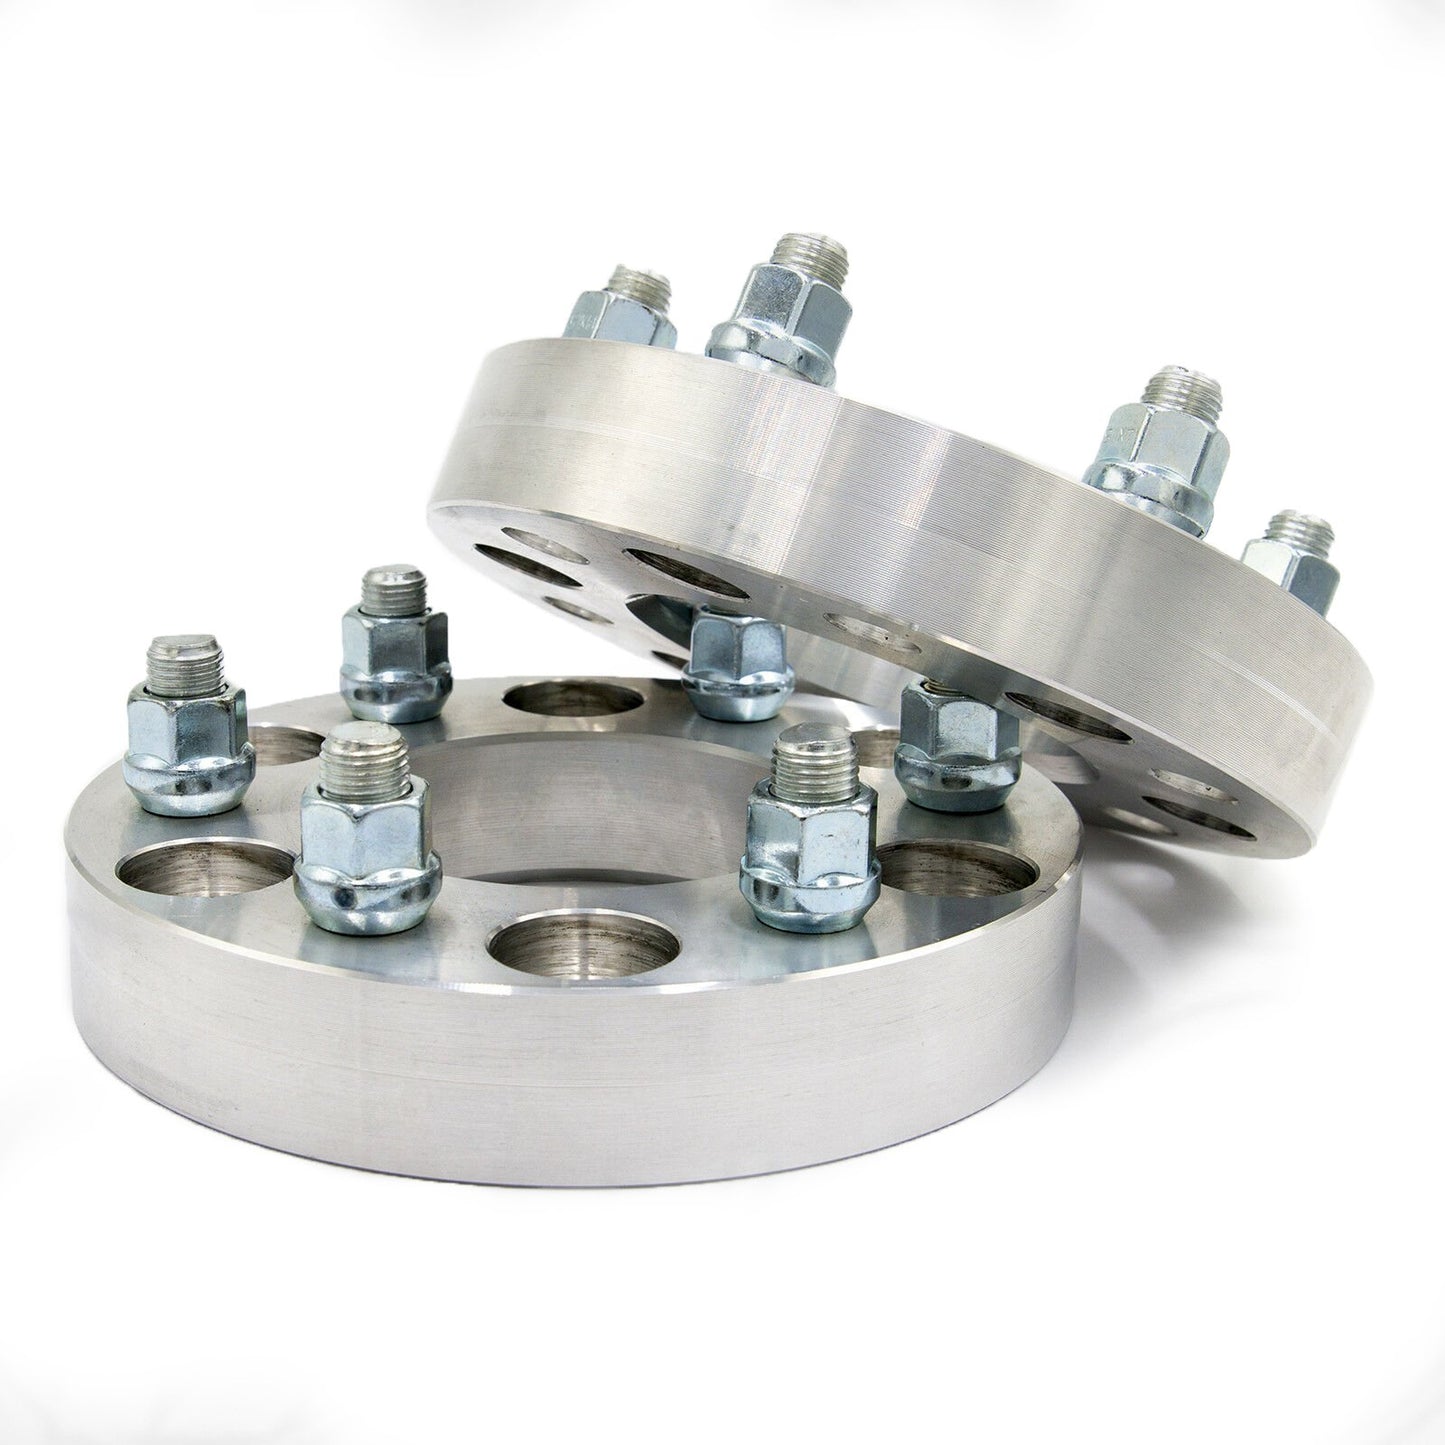 6x120 to 6x120 Wheel Spacer/Adapter - Thickness: 3/4"- 4"